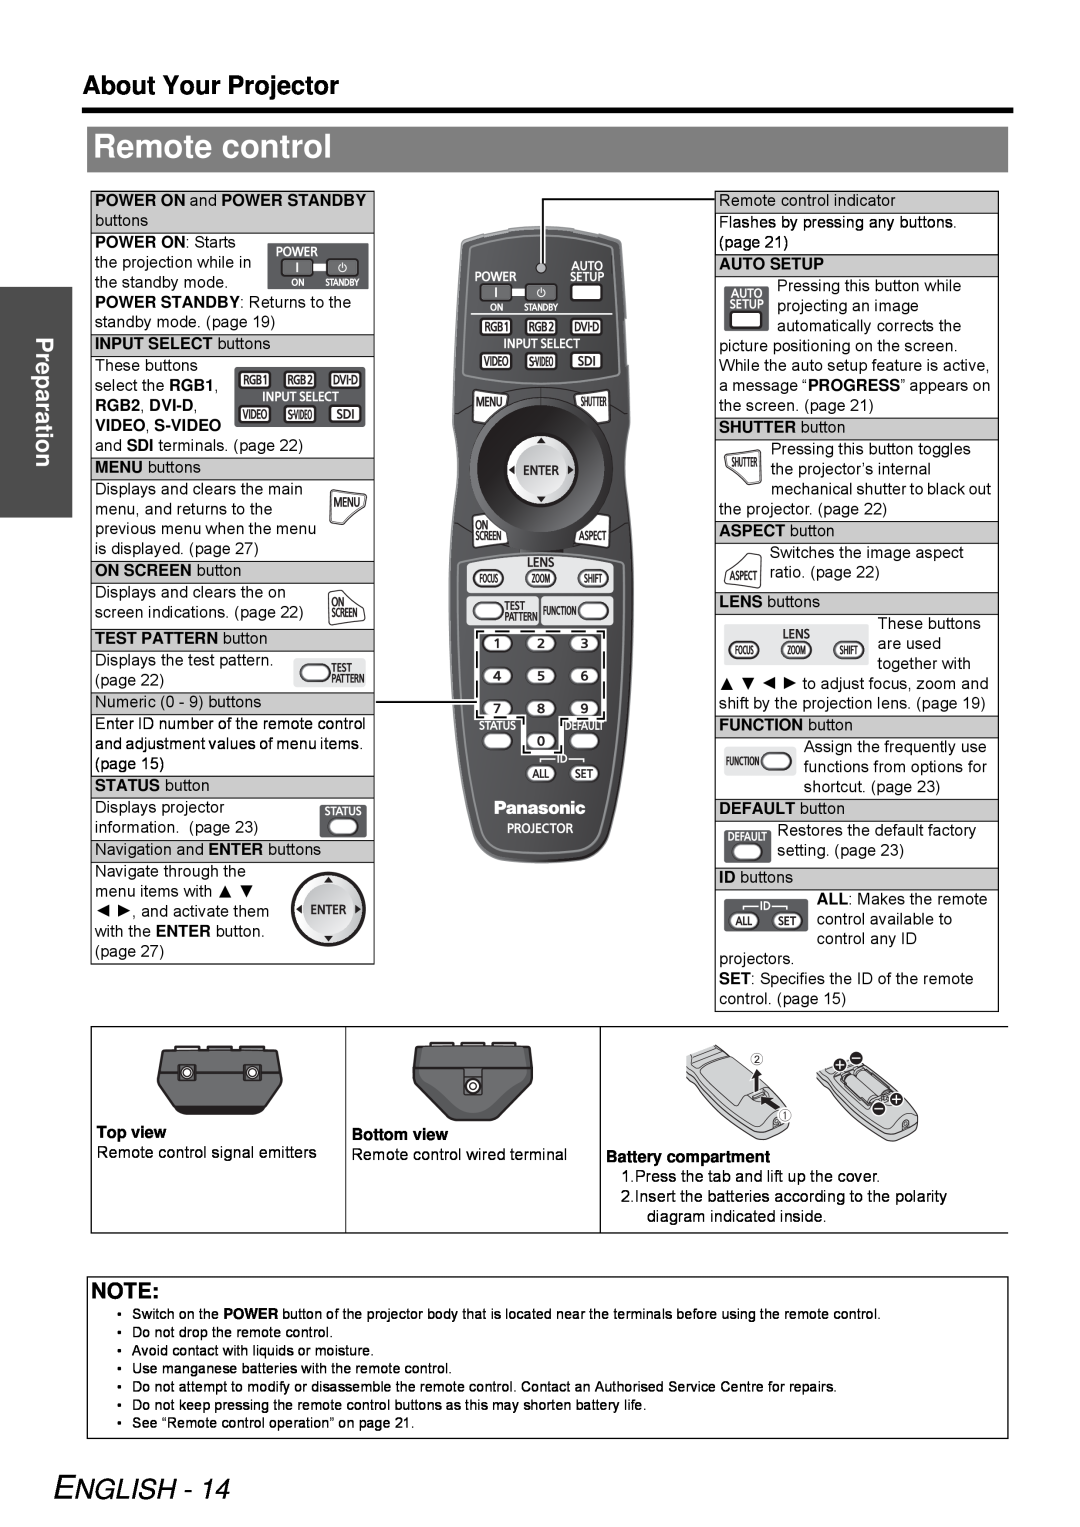 Panasonic PT-DZ6700E, PT-D5000E, PT-DW6300E, PT-D6000E, PT-DZ6710E Remote control, English, About Your Projector, Preparation 